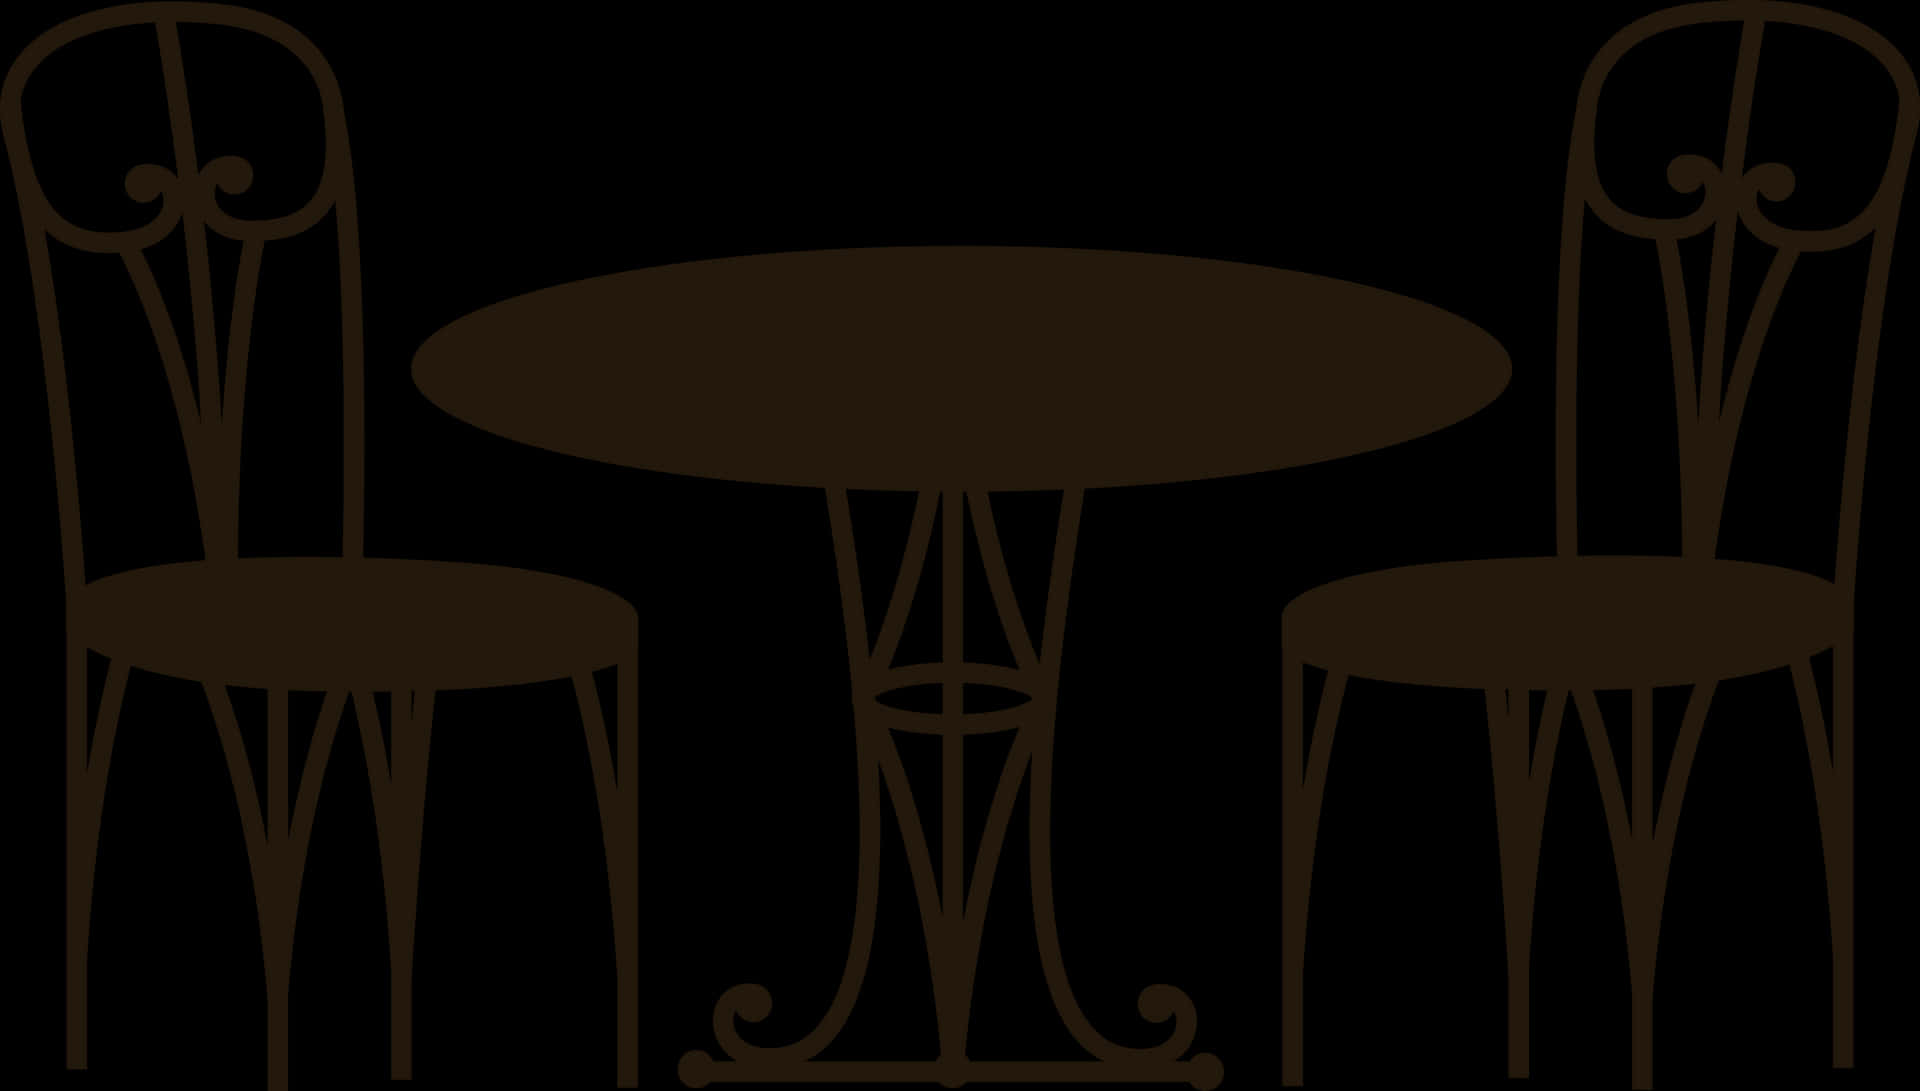 Table Png